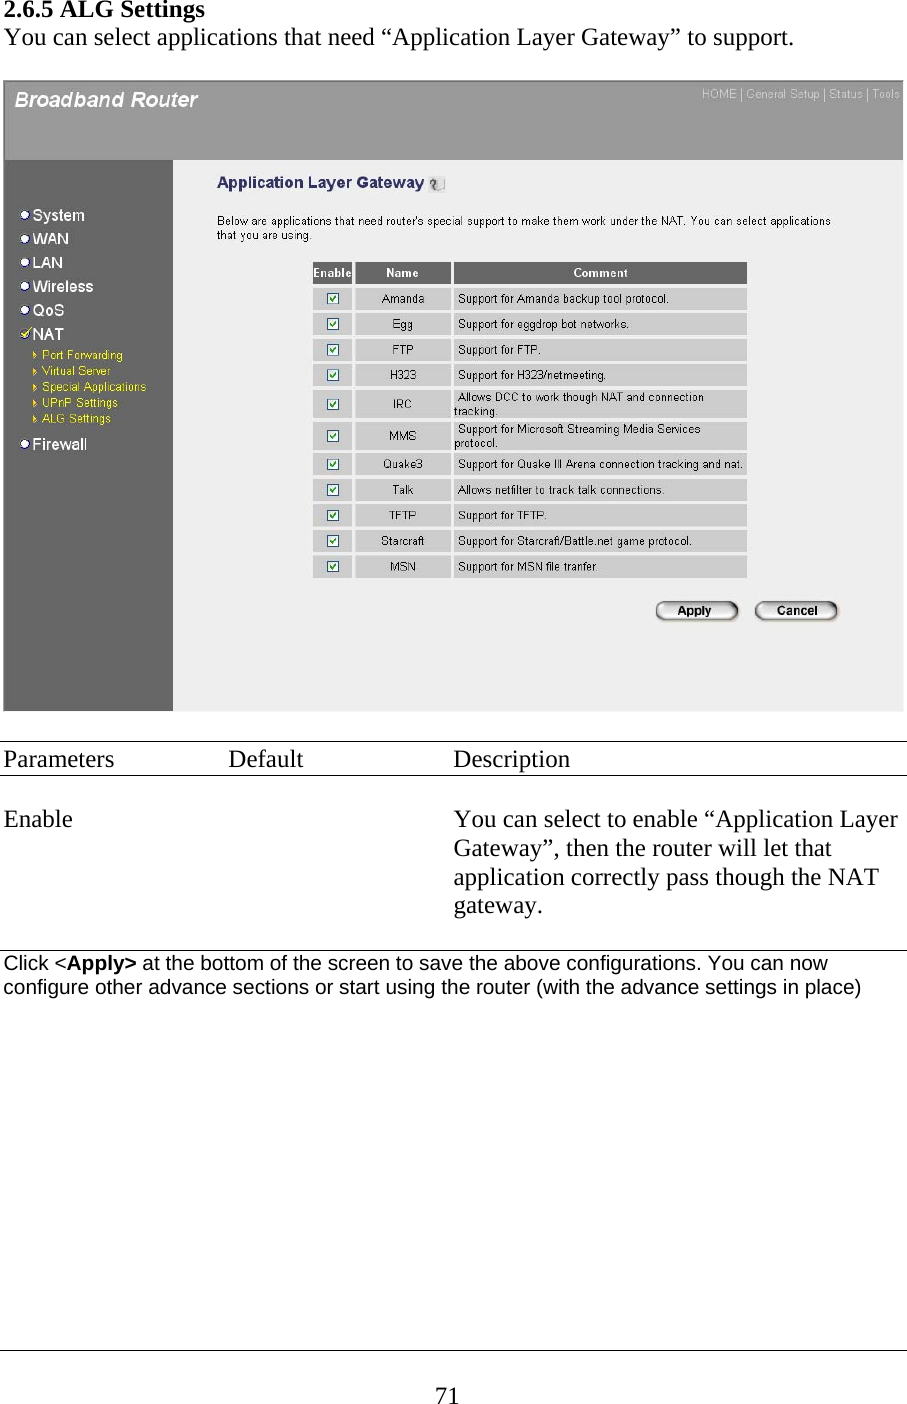 2.6.5 ALG Settings You can select applications that need “Application Layer Gateway” to support.    Parameters  Default  Description  Enable  You can select to enable “Application Layer Gateway”, then the router will let that application correctly pass though the NAT gateway.  Click &lt;Apply&gt; at the bottom of the screen to save the above configurations. You can now configure other advance sections or start using the router (with the advance settings in place)            71